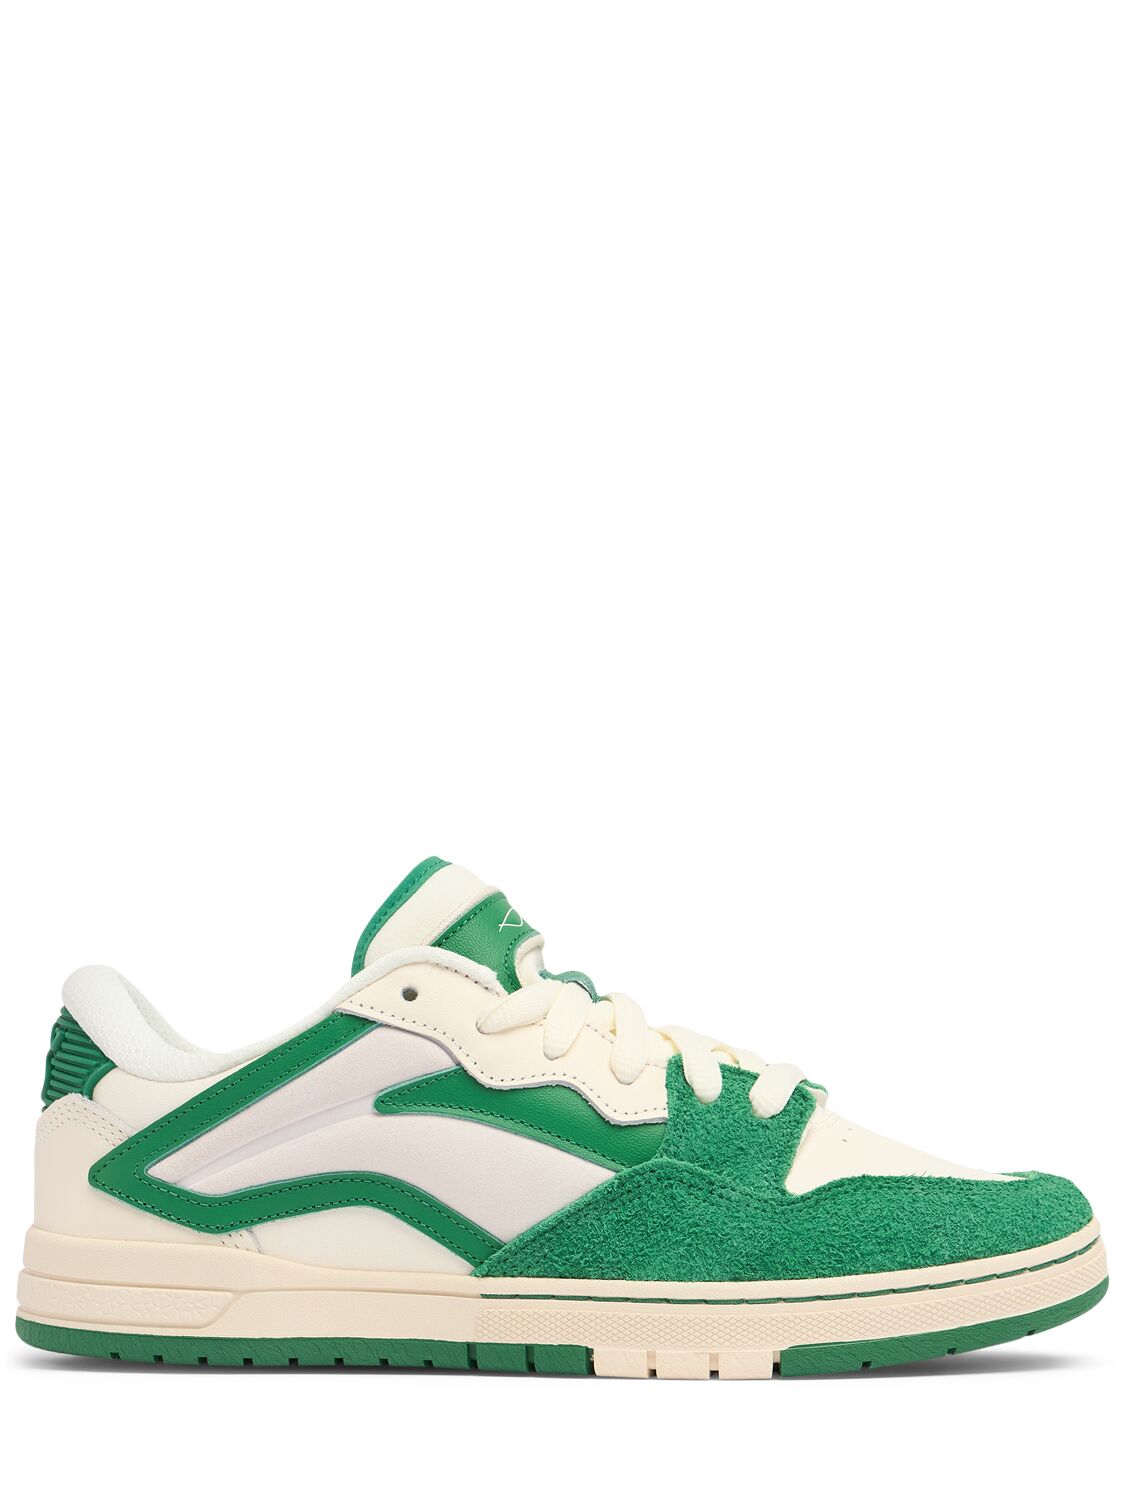 Li-ning Wave Pro S Trainers In Egg Shell,green